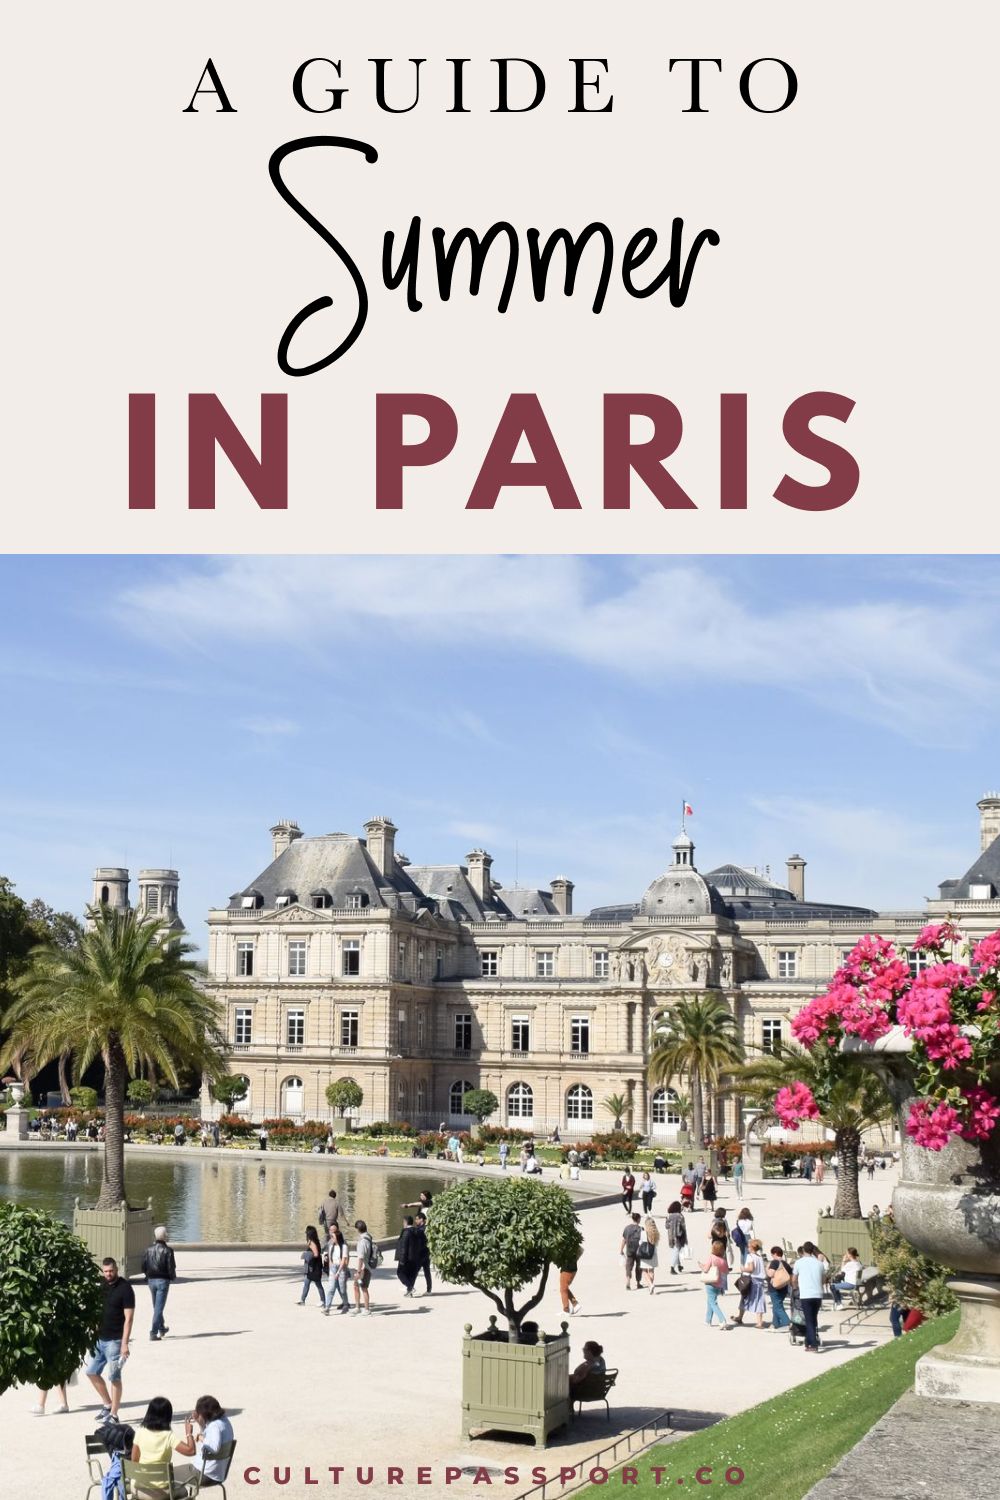 A Guide to Summer in Paris – The Ultimate Guide to Visiting Paris in Summer with what to do, where to go, things to do, and places to see! #parisguide